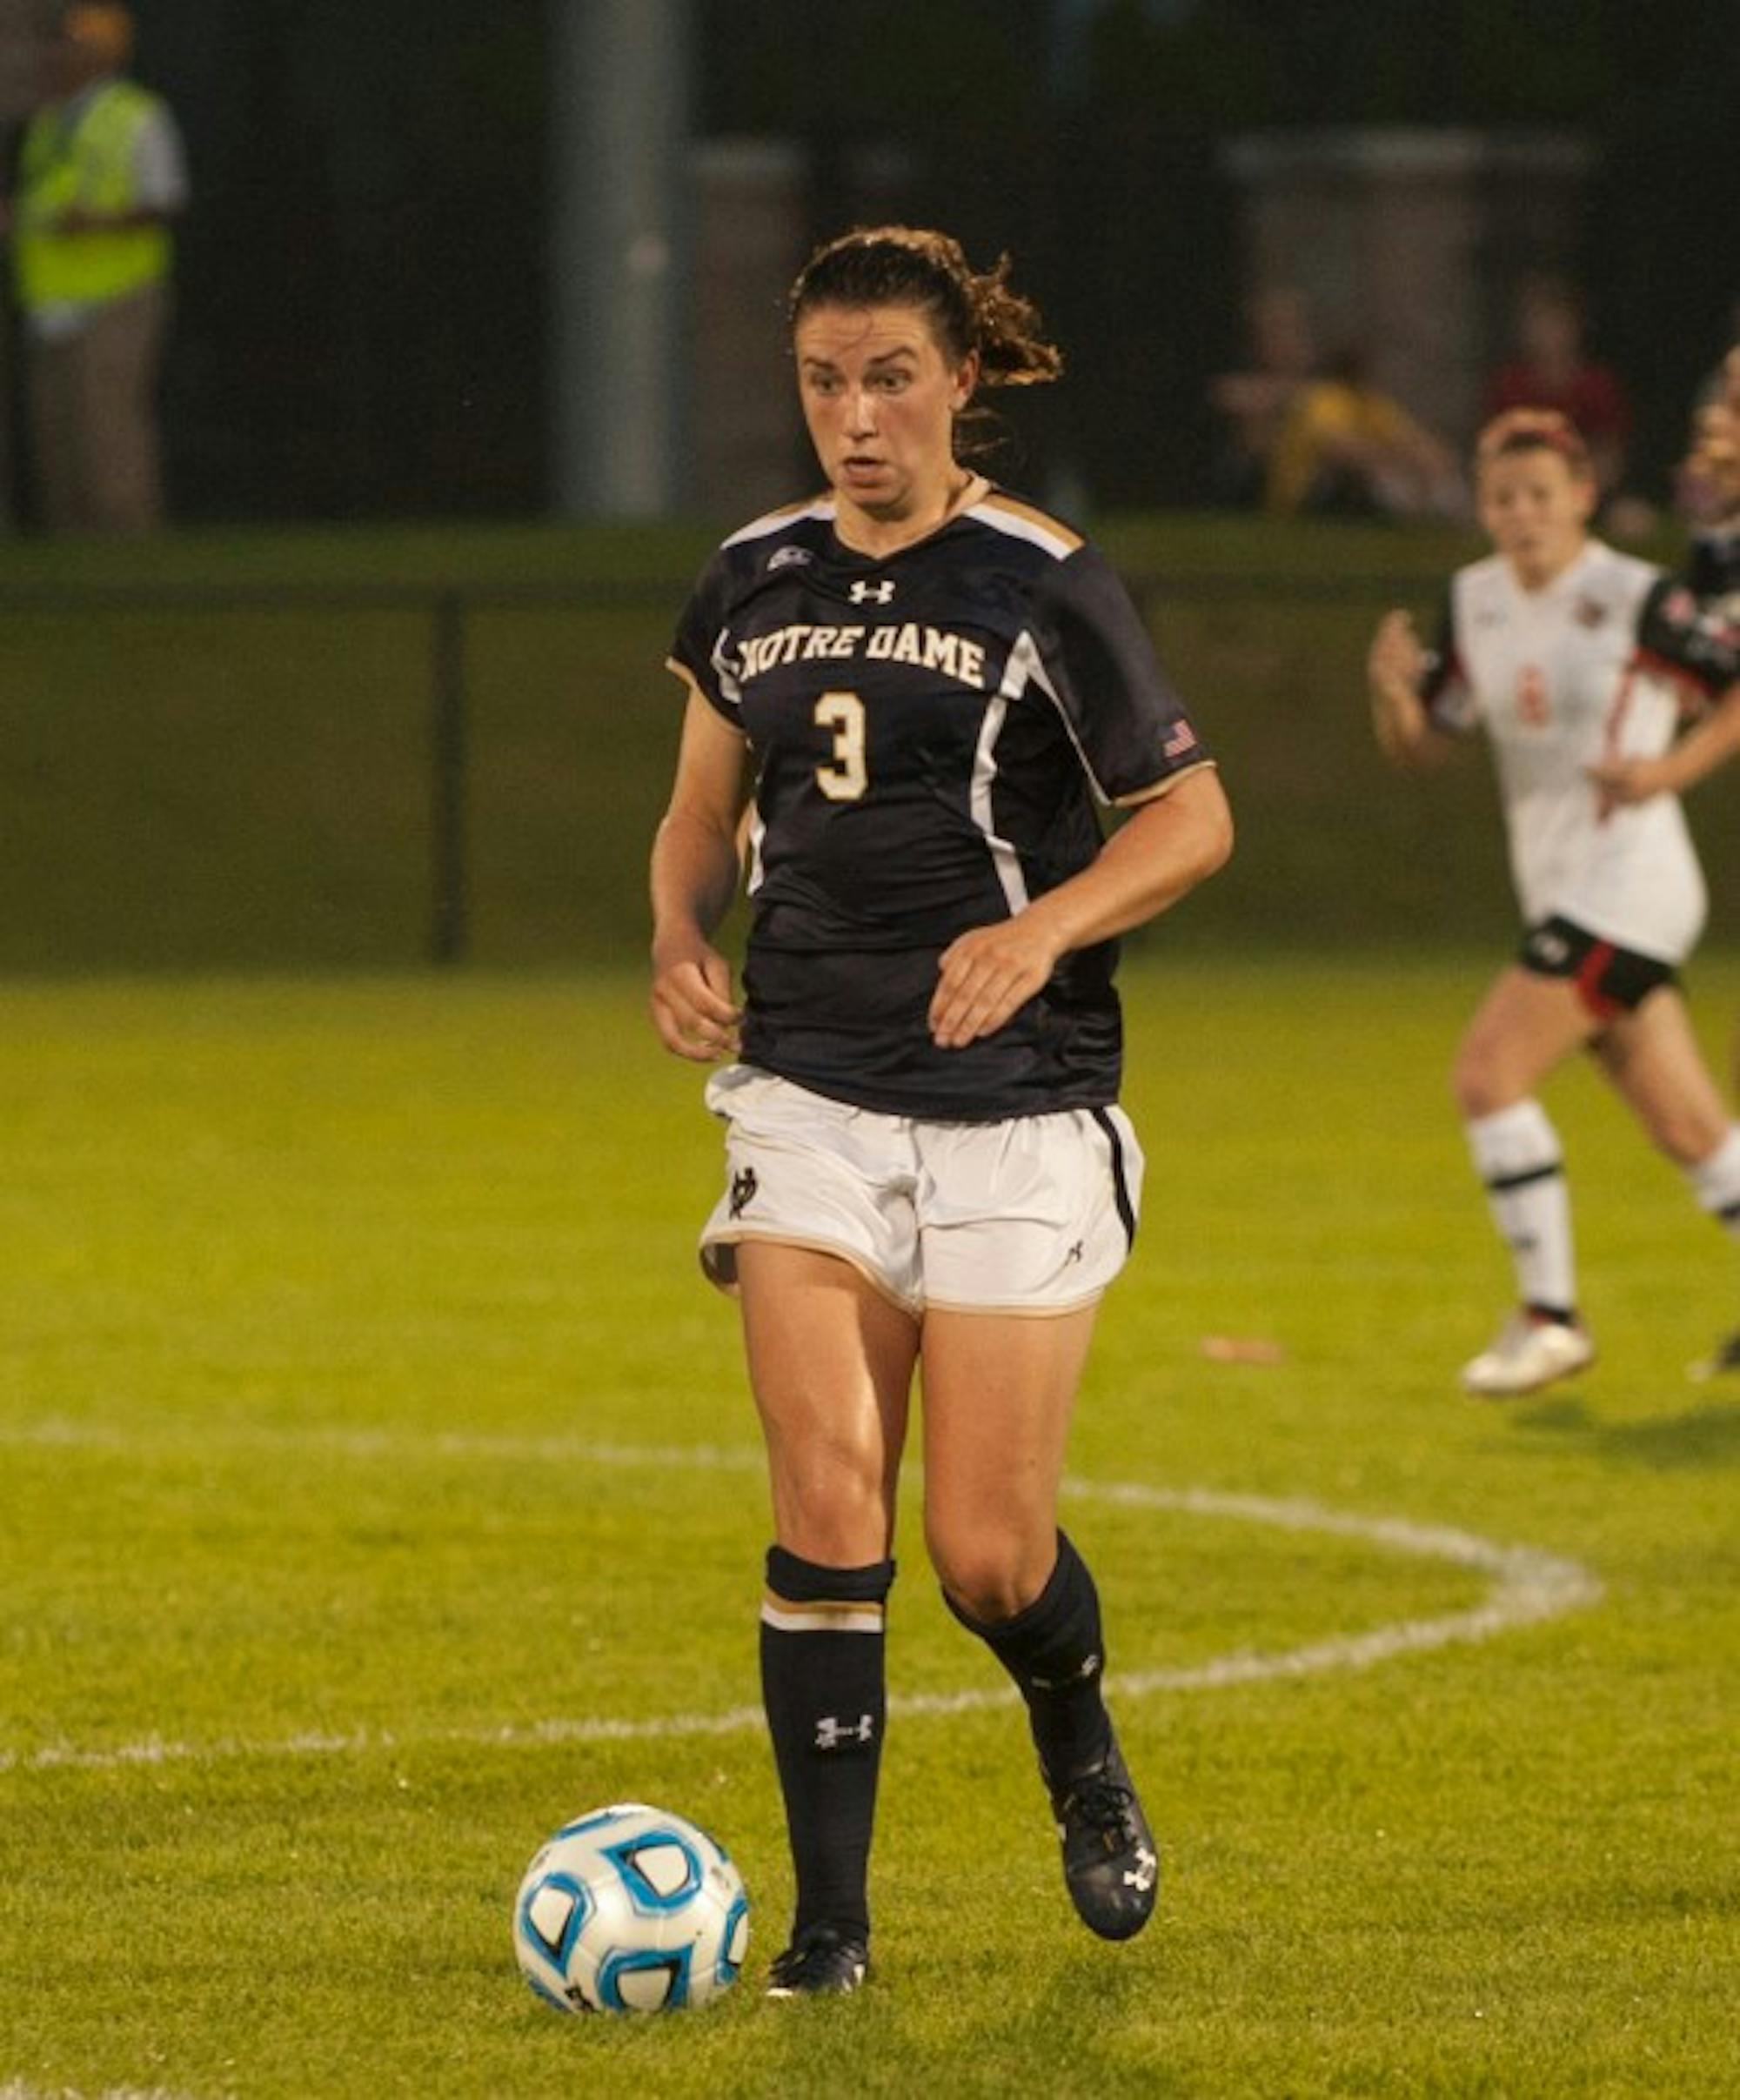 Irish sophomore midfielder Morgan Andrews looks to pass during Notre Dame’s 2-1 loss to Texas Tech on Aug. 29 at Alumni Stadium.